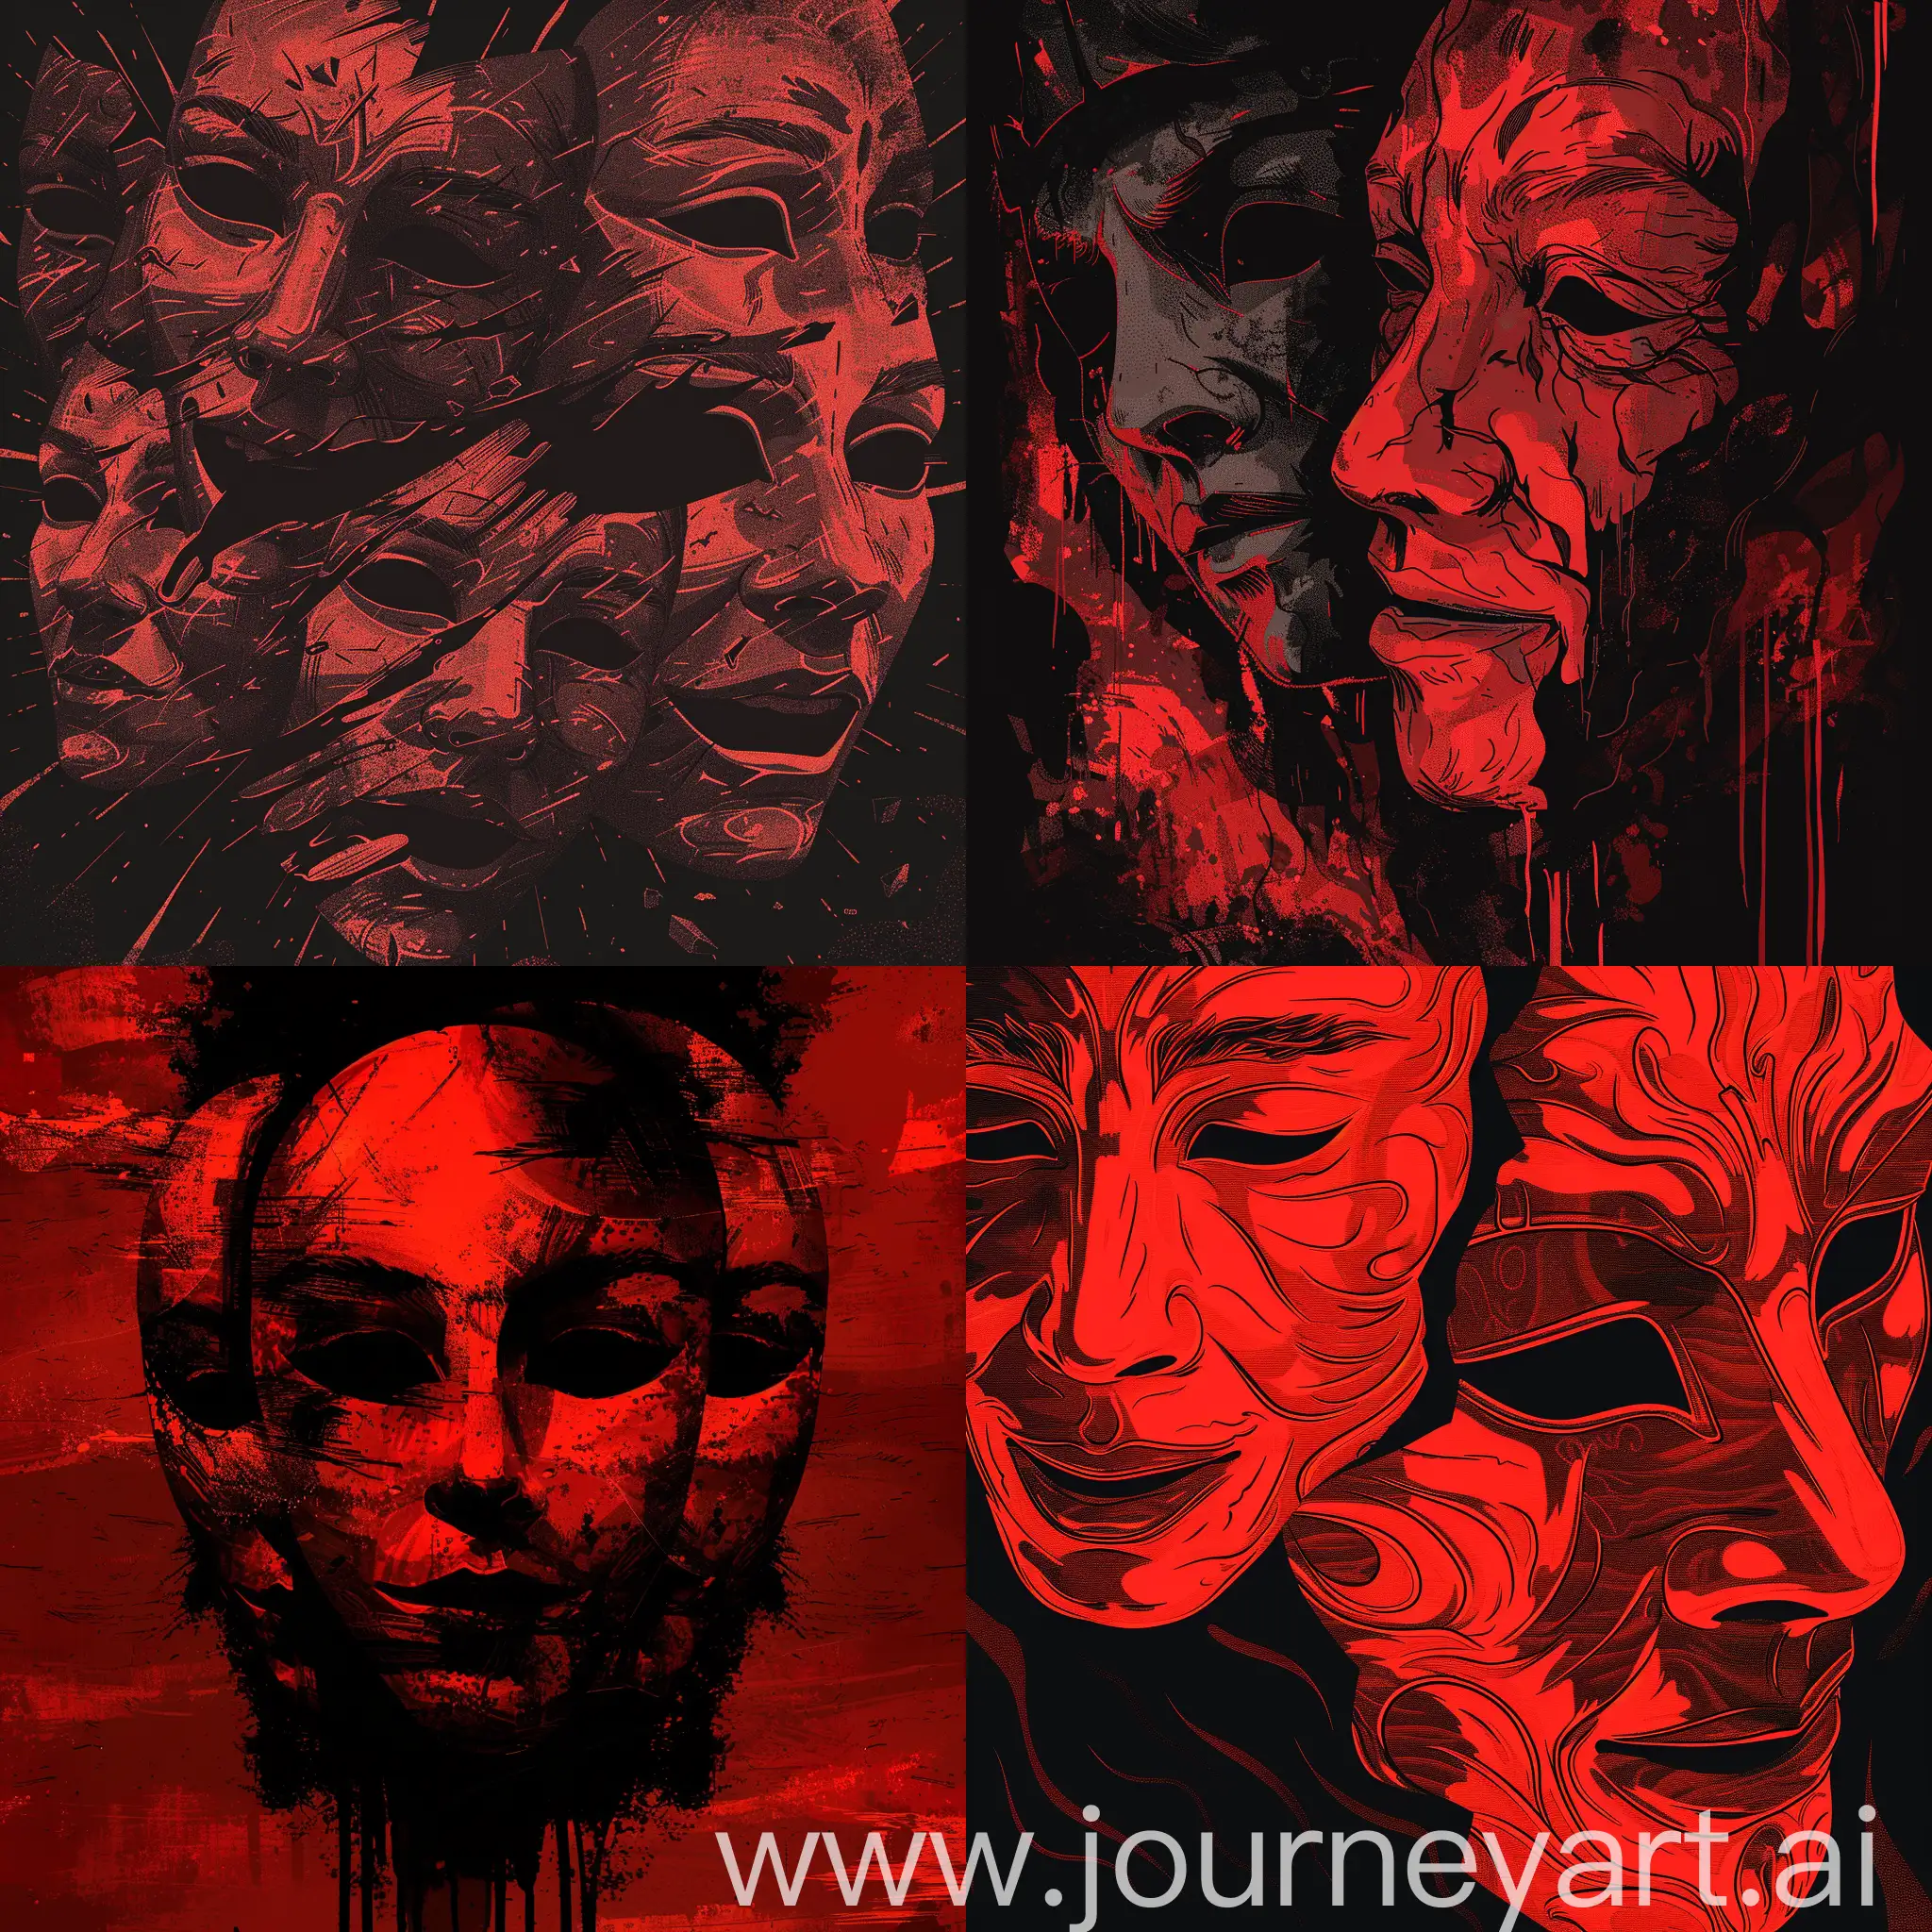 Symbolic-Illustration-of-Mortality-Masks-Unveiled-in-Red-and-Black